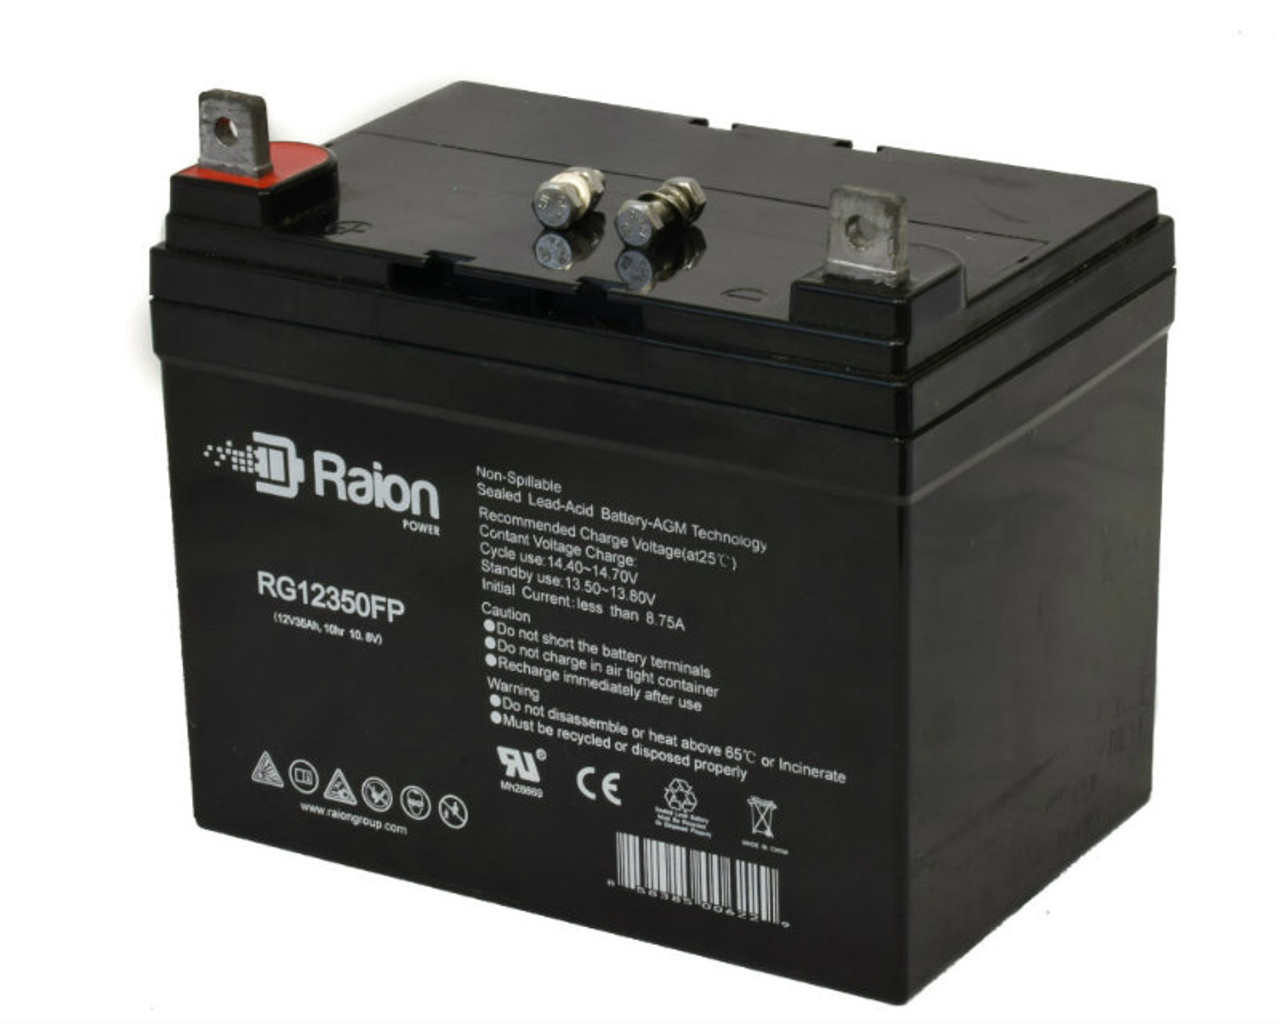 Raion Power Replacement 12V 35Ah Battery for Ferris PRO CUT 61 - 1 Pack